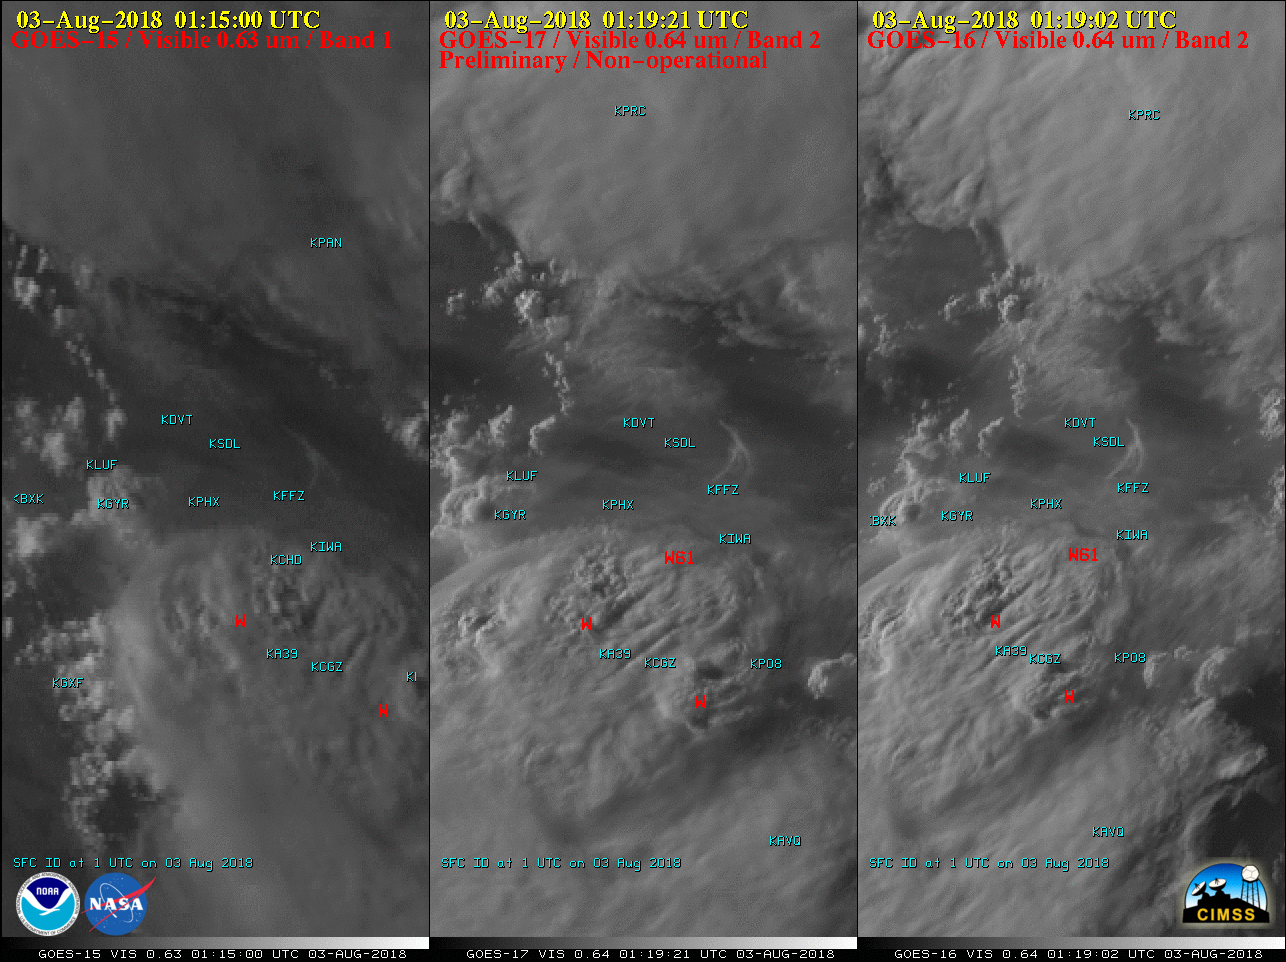 Visible images from GOES-15 (0.63 µm, left), GOES-17 (0.64 µm, center) and GOES-16 (0.64 µm, right), with SPC storm reports plotted in red [click to play animation | MP4]